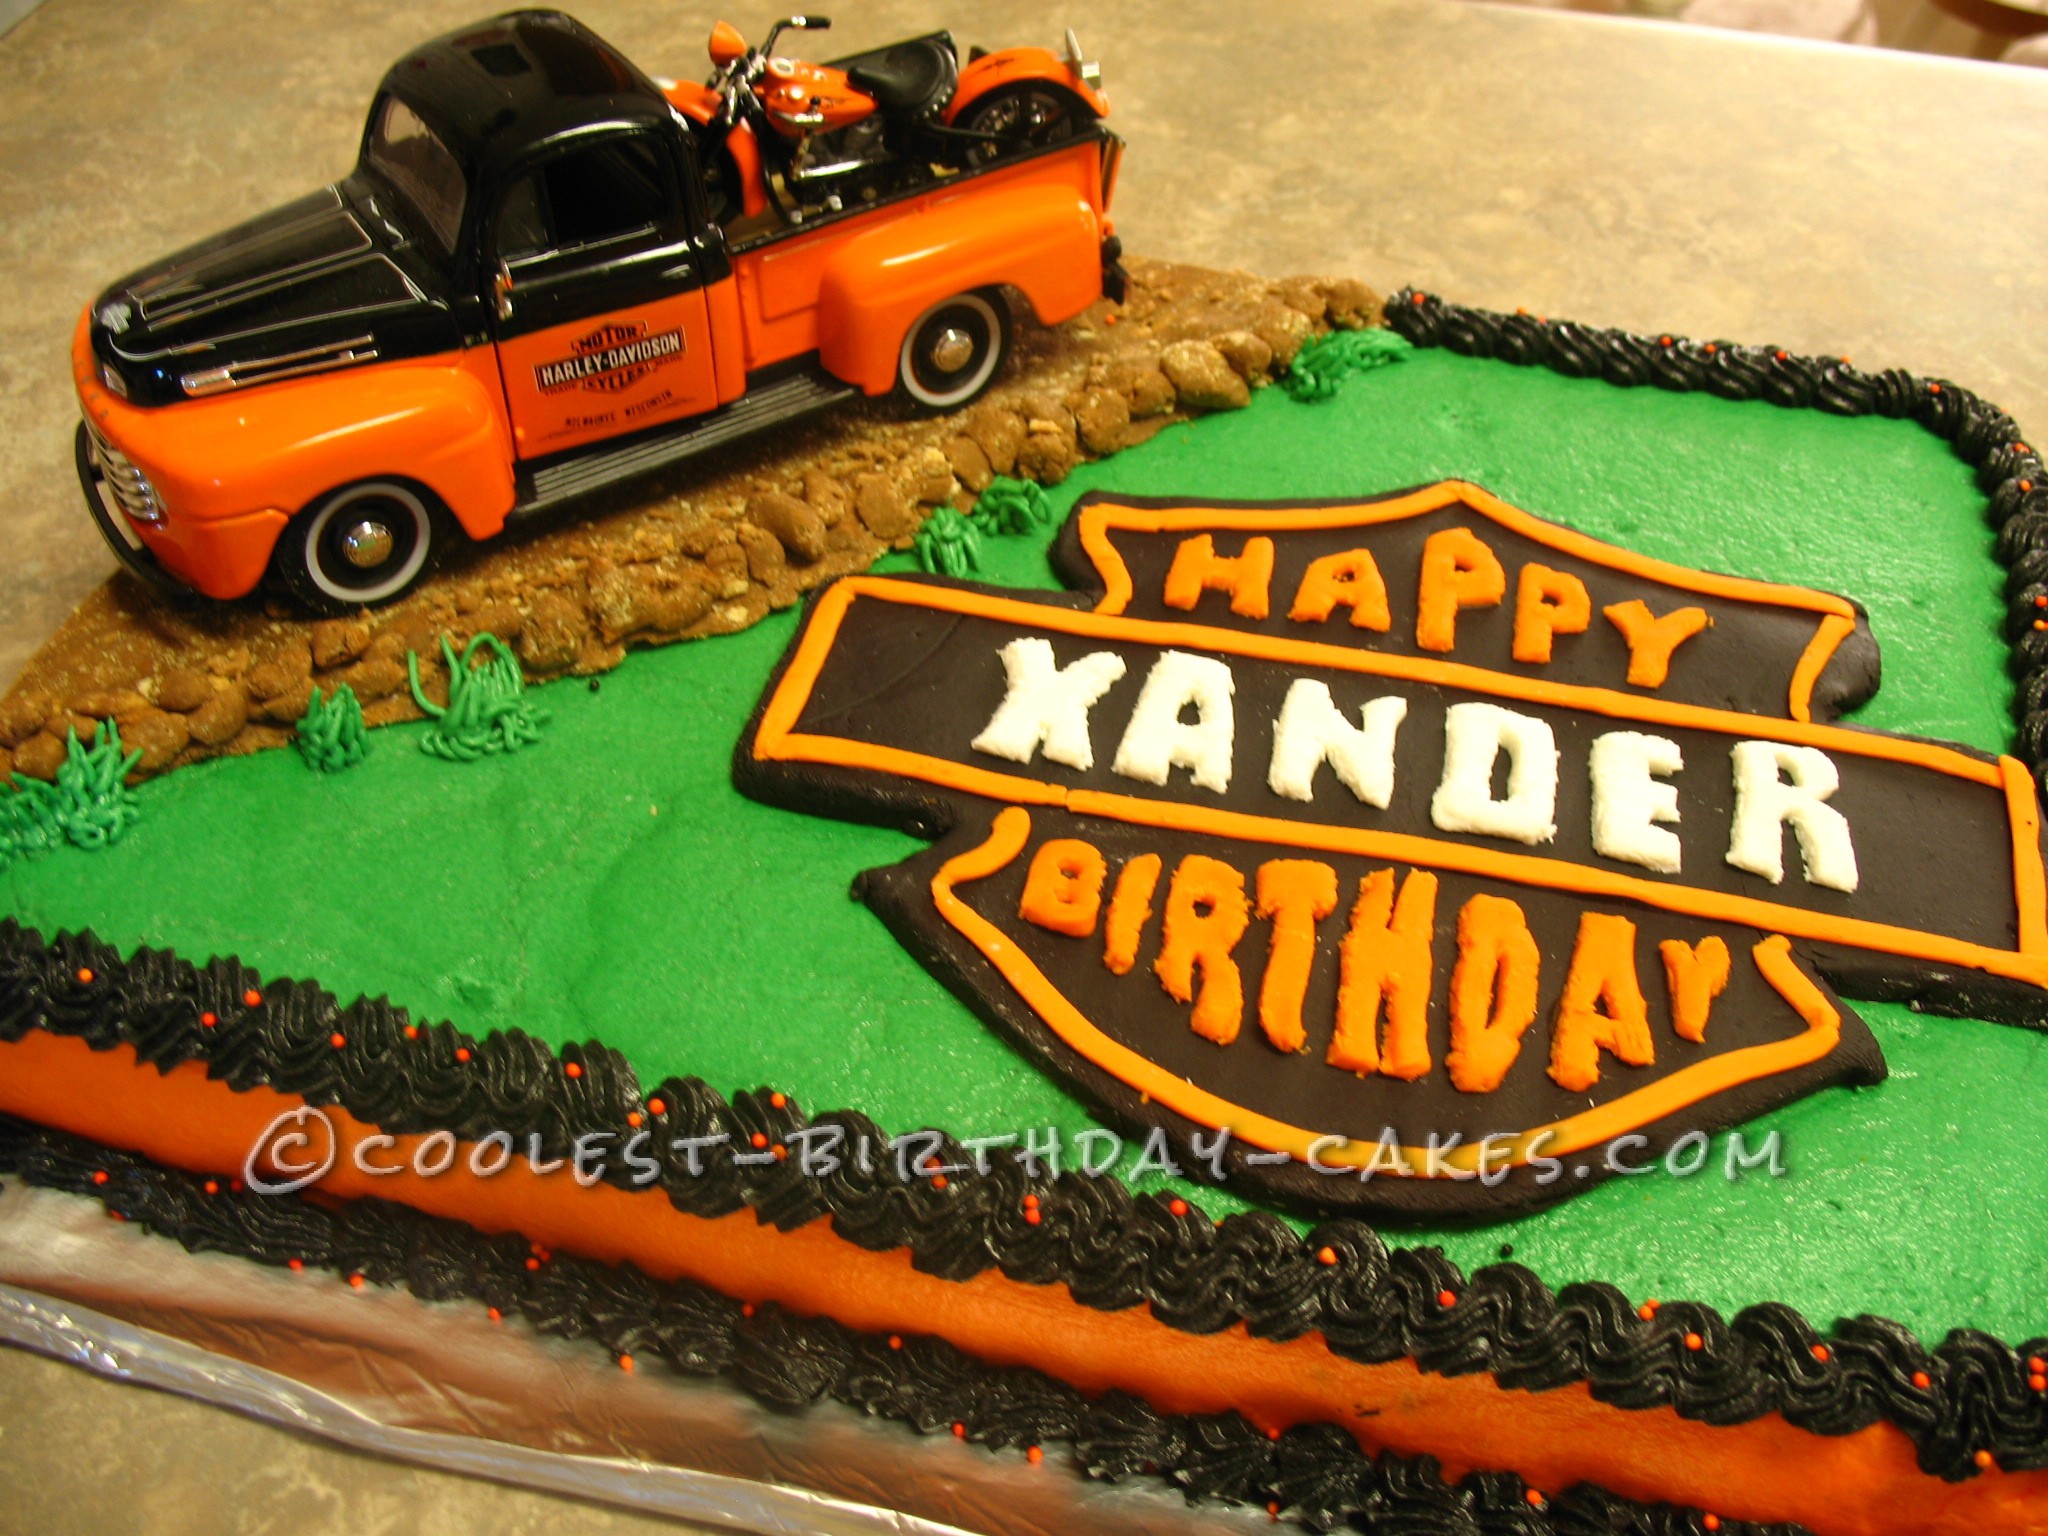 Coolest Diy Birthday Cakes Motorcycles And Harley Davidson Emblems Cakes